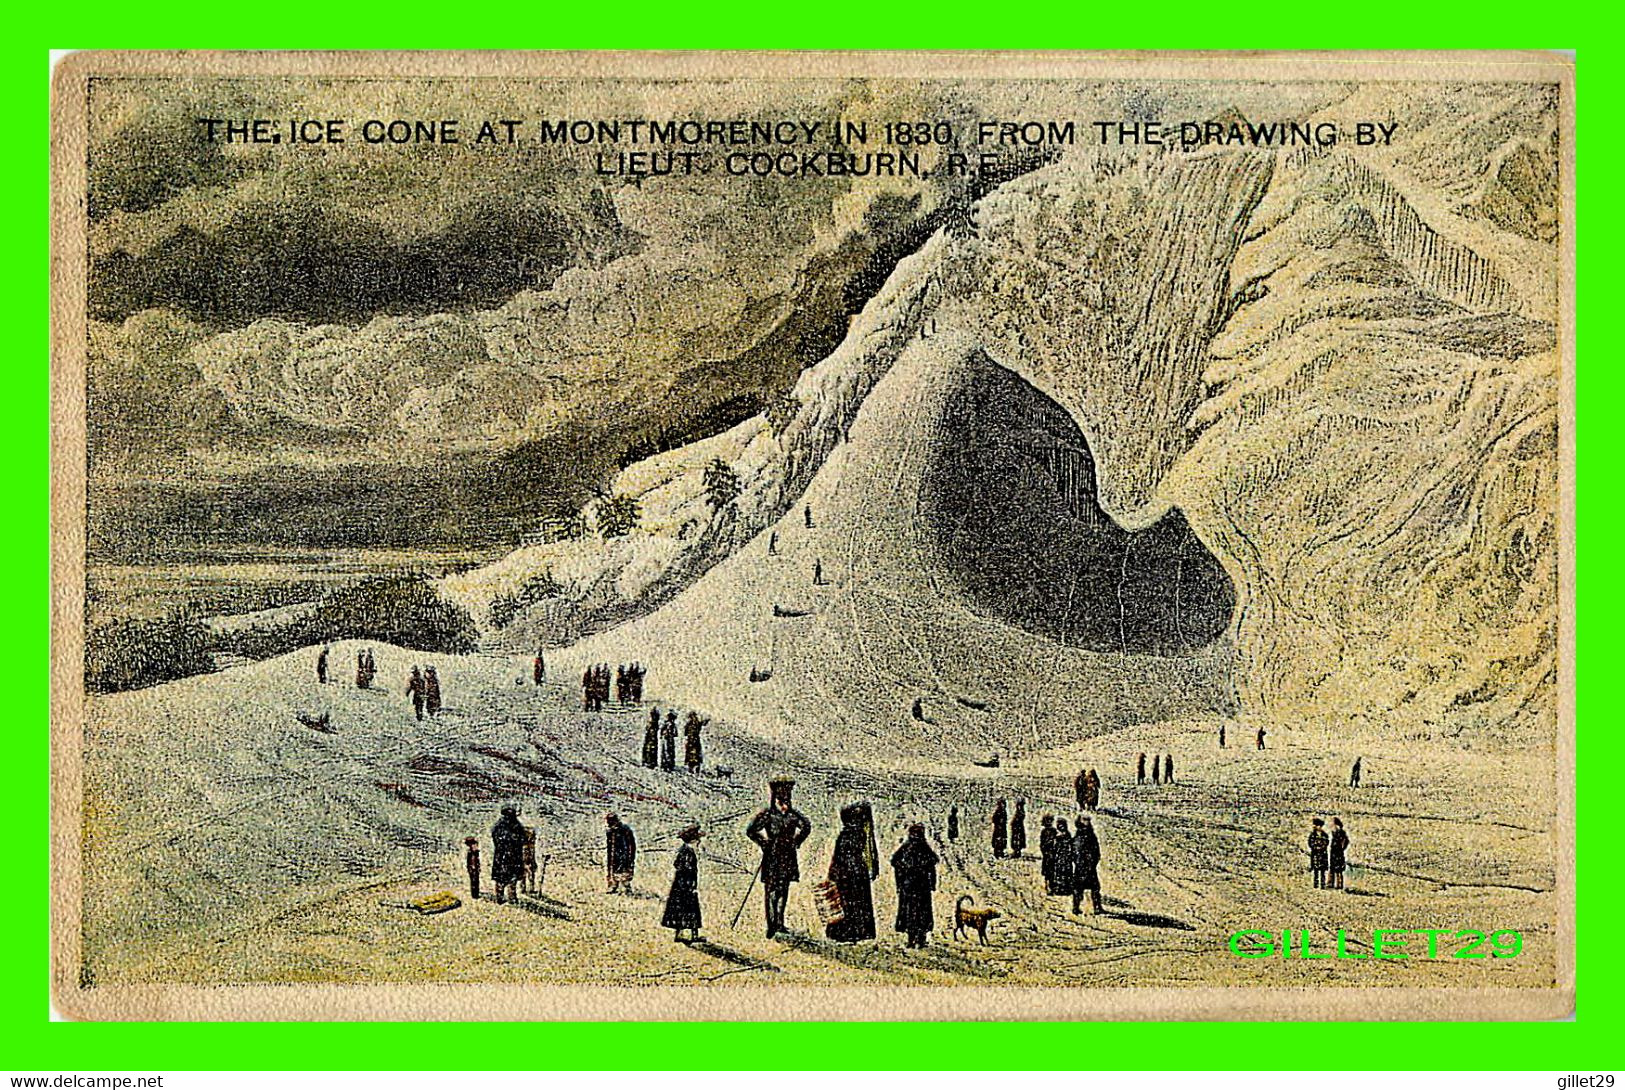 MONTMORENCY, QUÉBEC - THE ICE CONE AT MONTMORENCY IN 1830 FROM THE DRAWING BY LIEUT. COCKBURN, R.E. - MORTIMER CO - - Chutes Montmorency